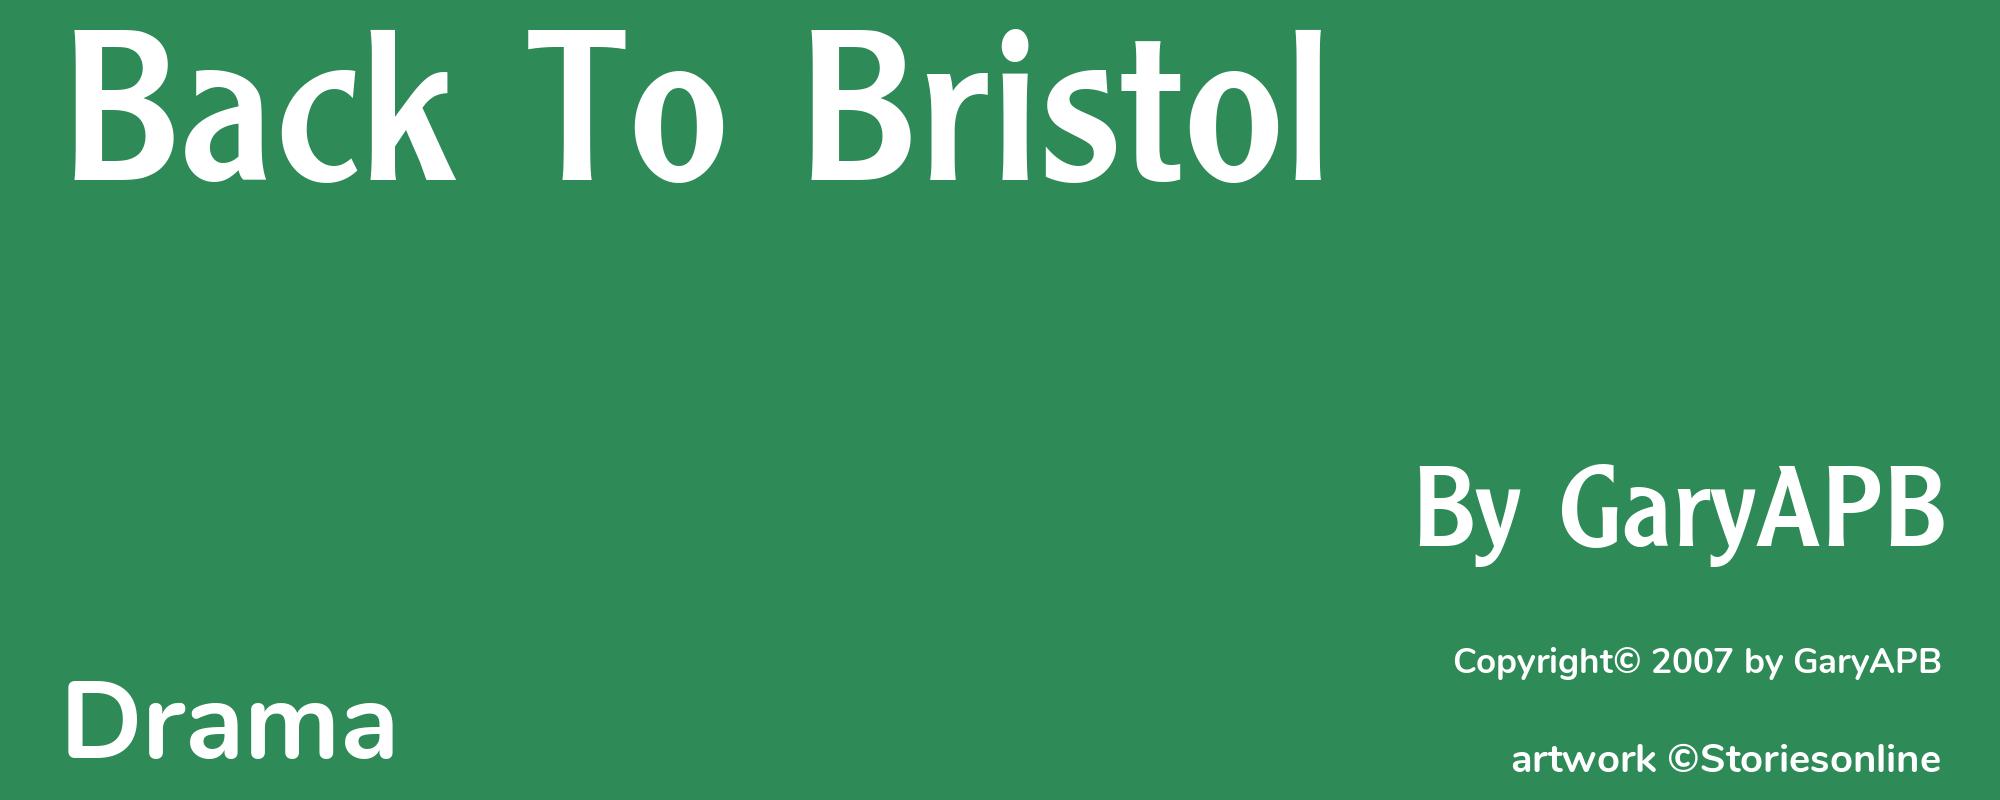 Back To Bristol - Cover